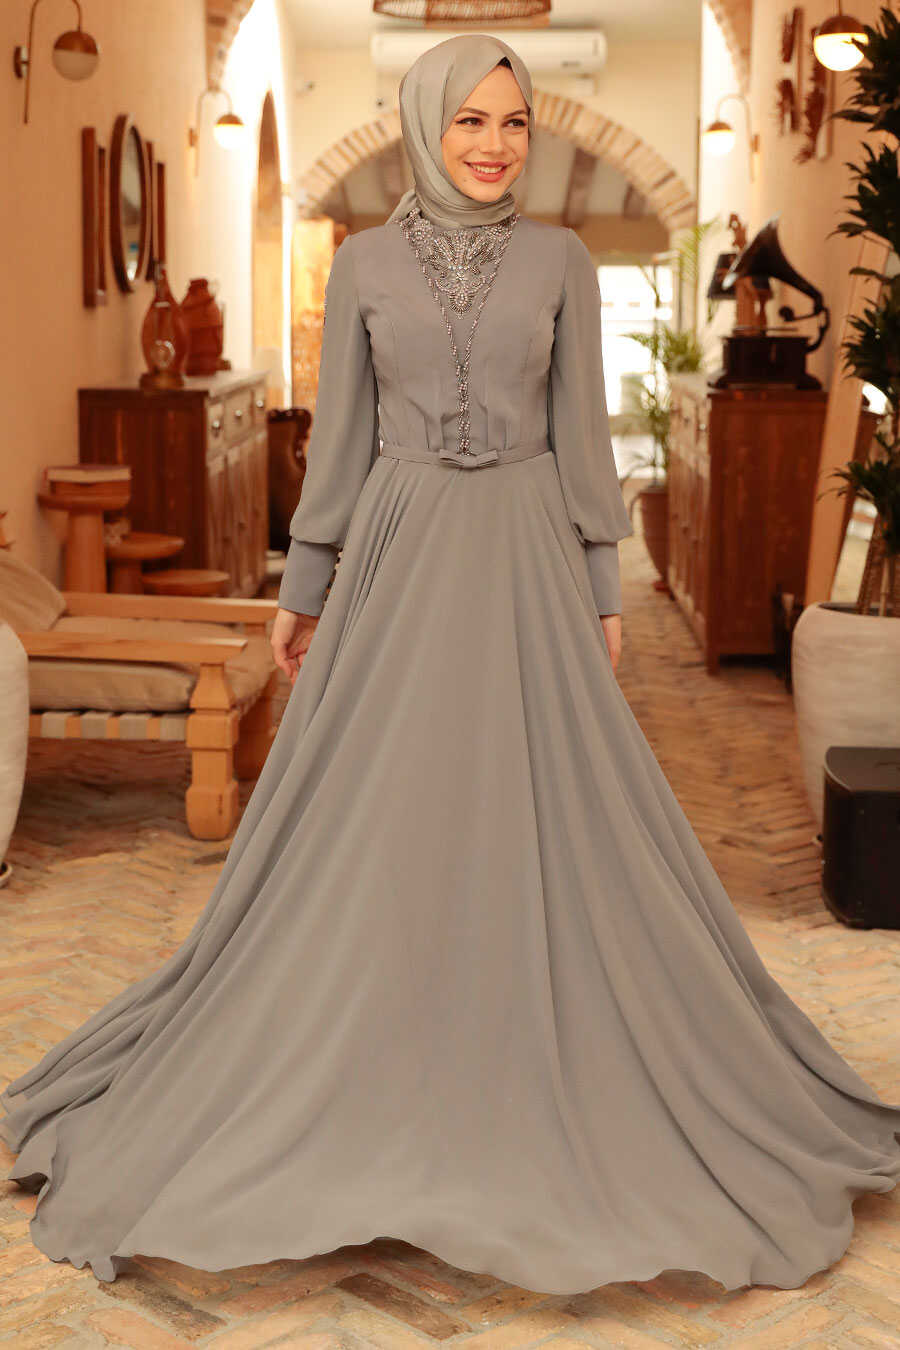 Party Dresses Champagne Long Sleeve Hijab Muslim Evening High Neck Islamic  Formal Gowns Beaded Arabic Kafan Robes De 230510 From Long01, $114.18 |  DHgate.Com